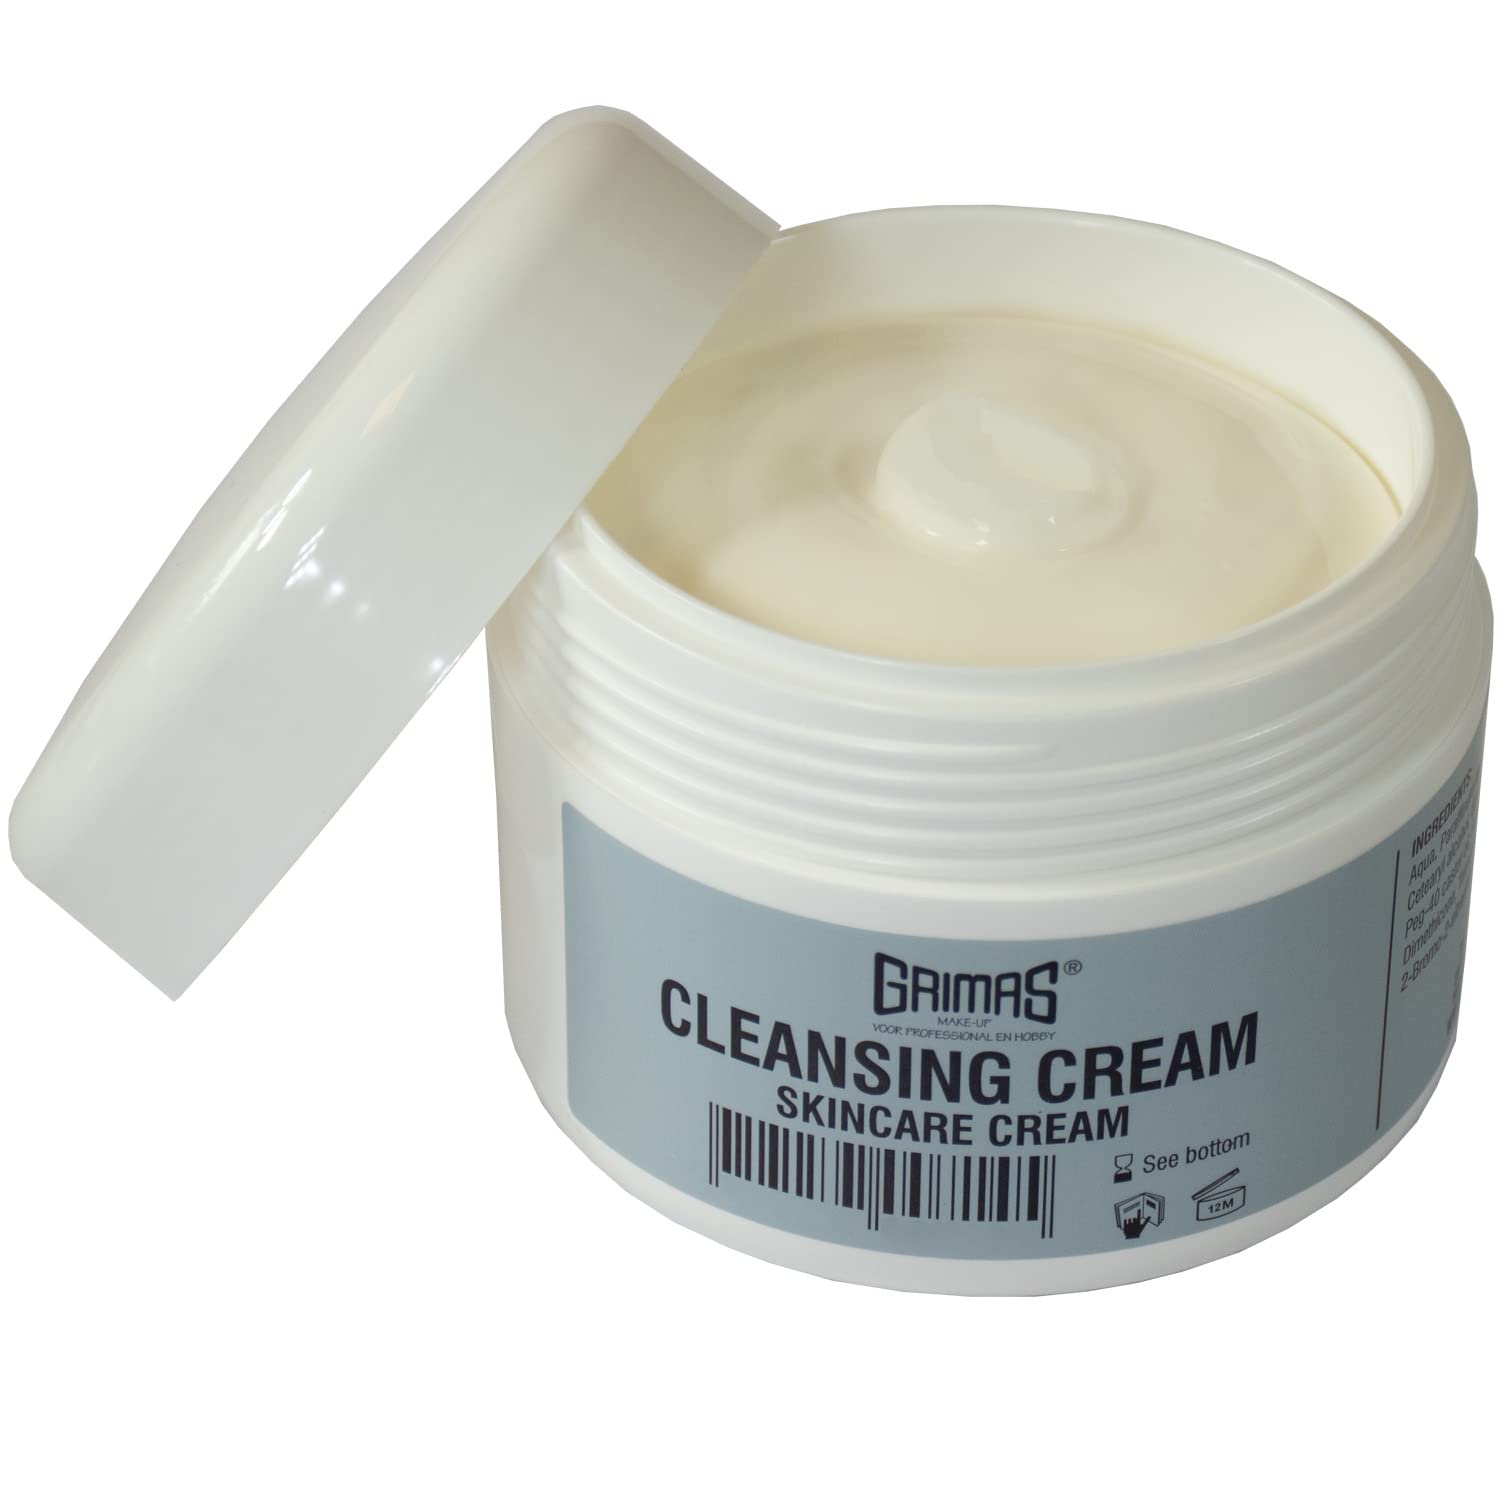 Grimas Cleansing Cream, 200 ml, Professional Skin Cleansing Cream for Removing All Types of Makeup